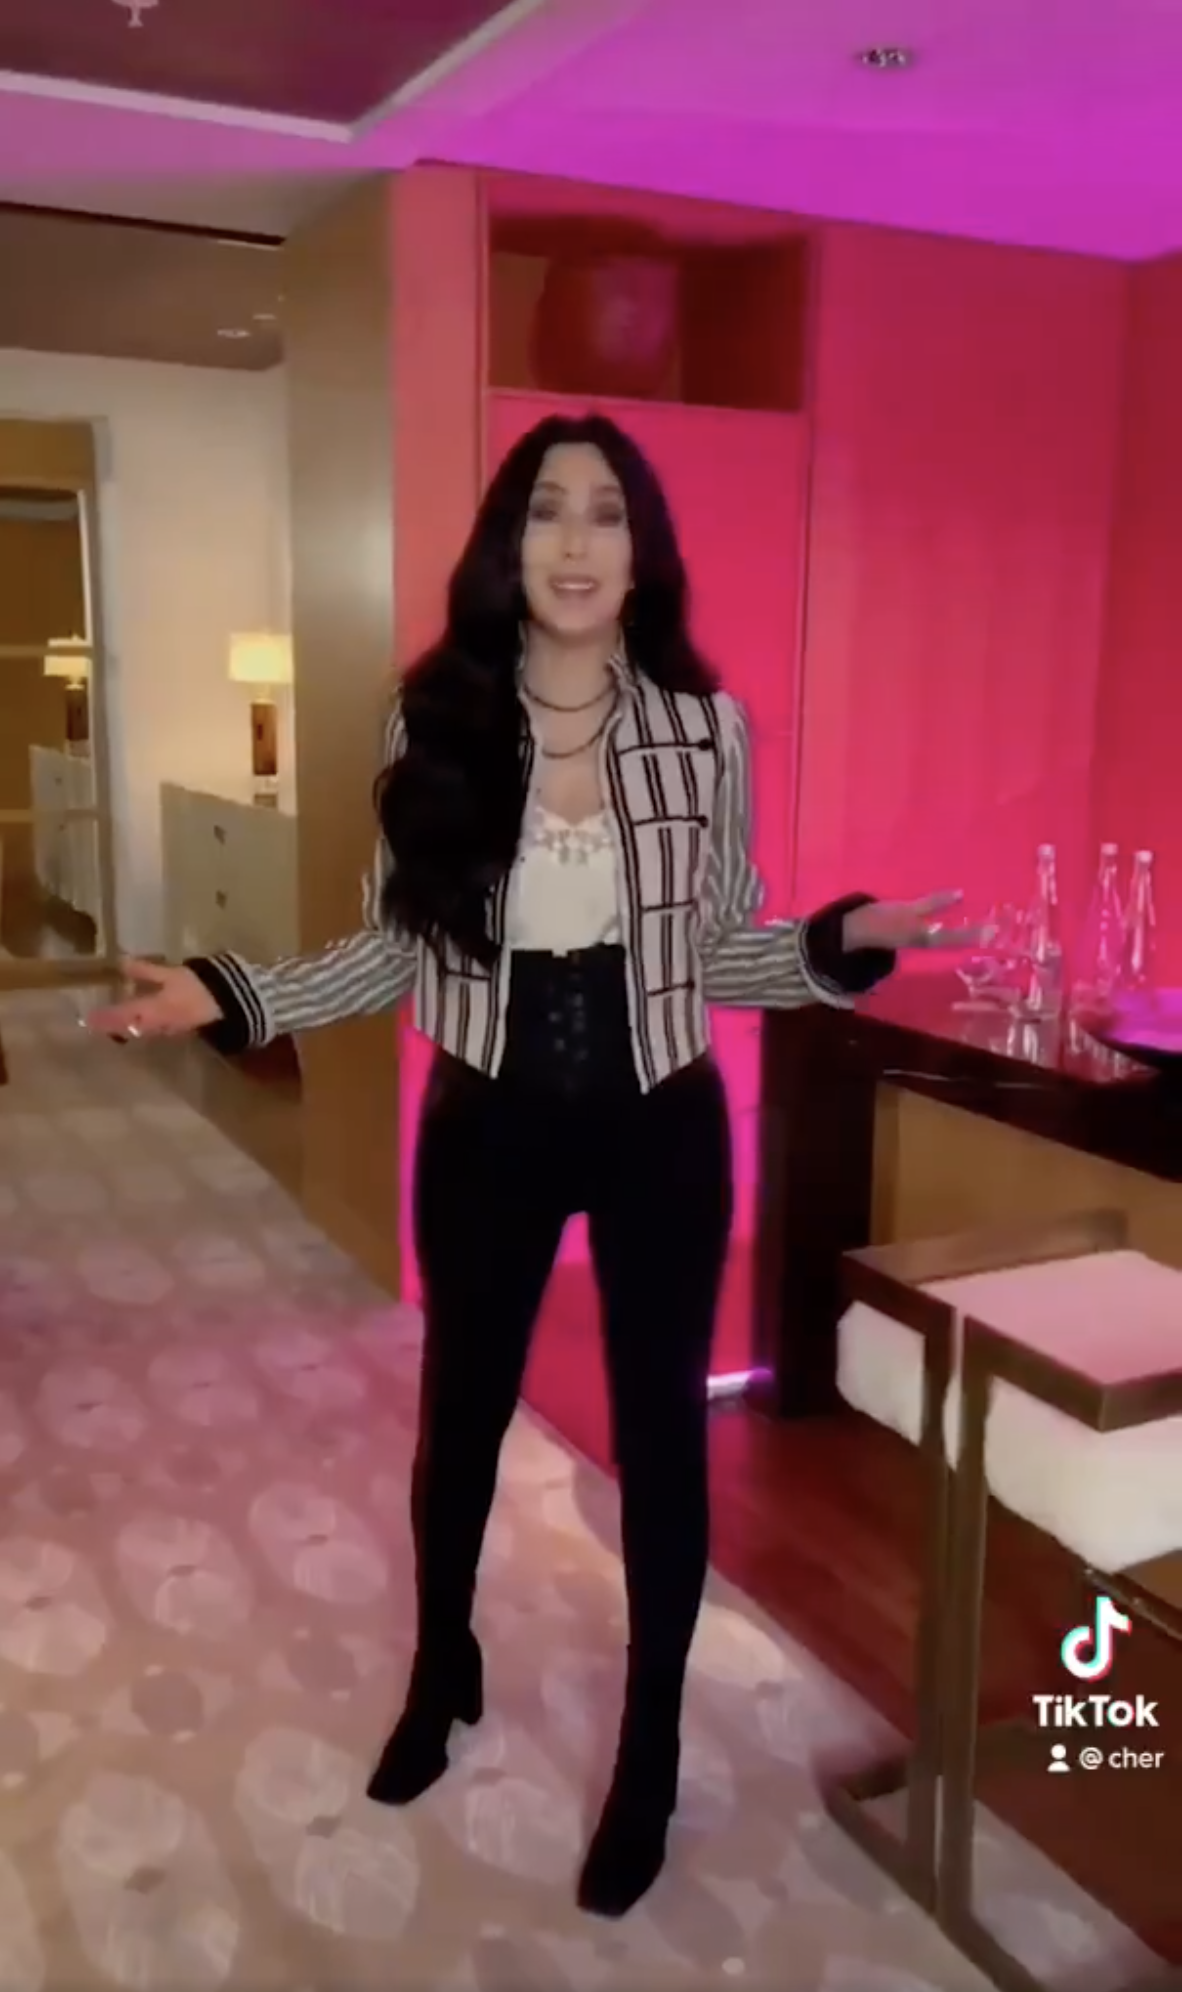 Cher again appears as a brunette in her first TikTok video